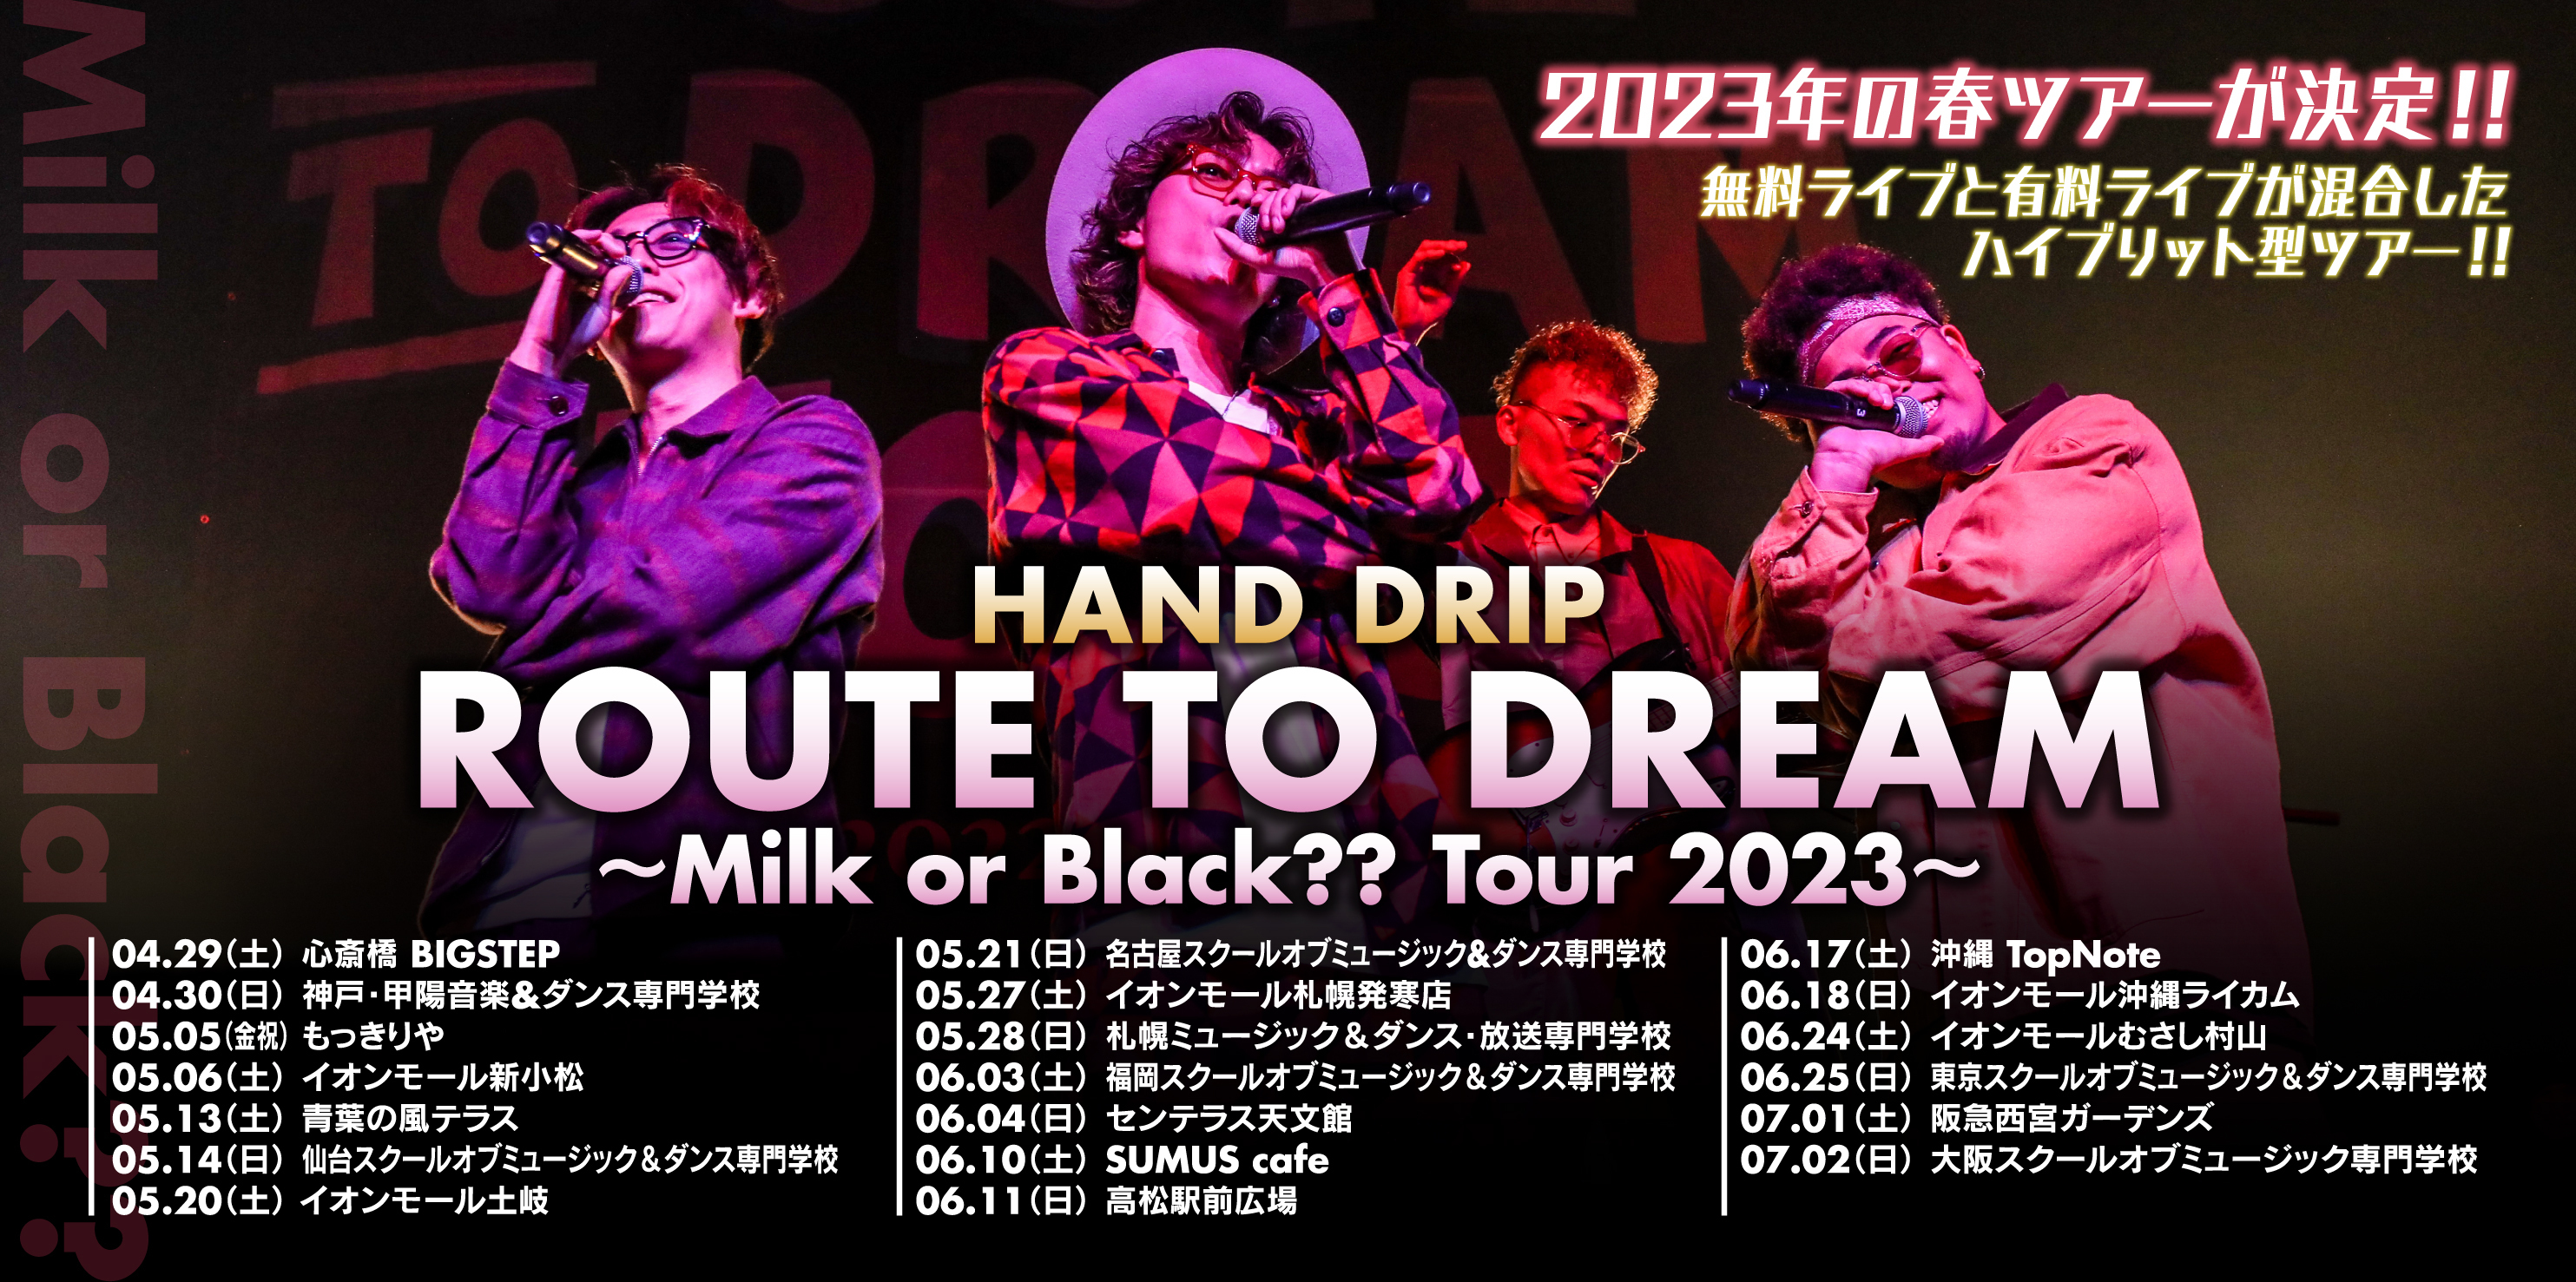 HAND DRIP ROUTE TO DREAM〜Milk or Black?? Tour 2023〜